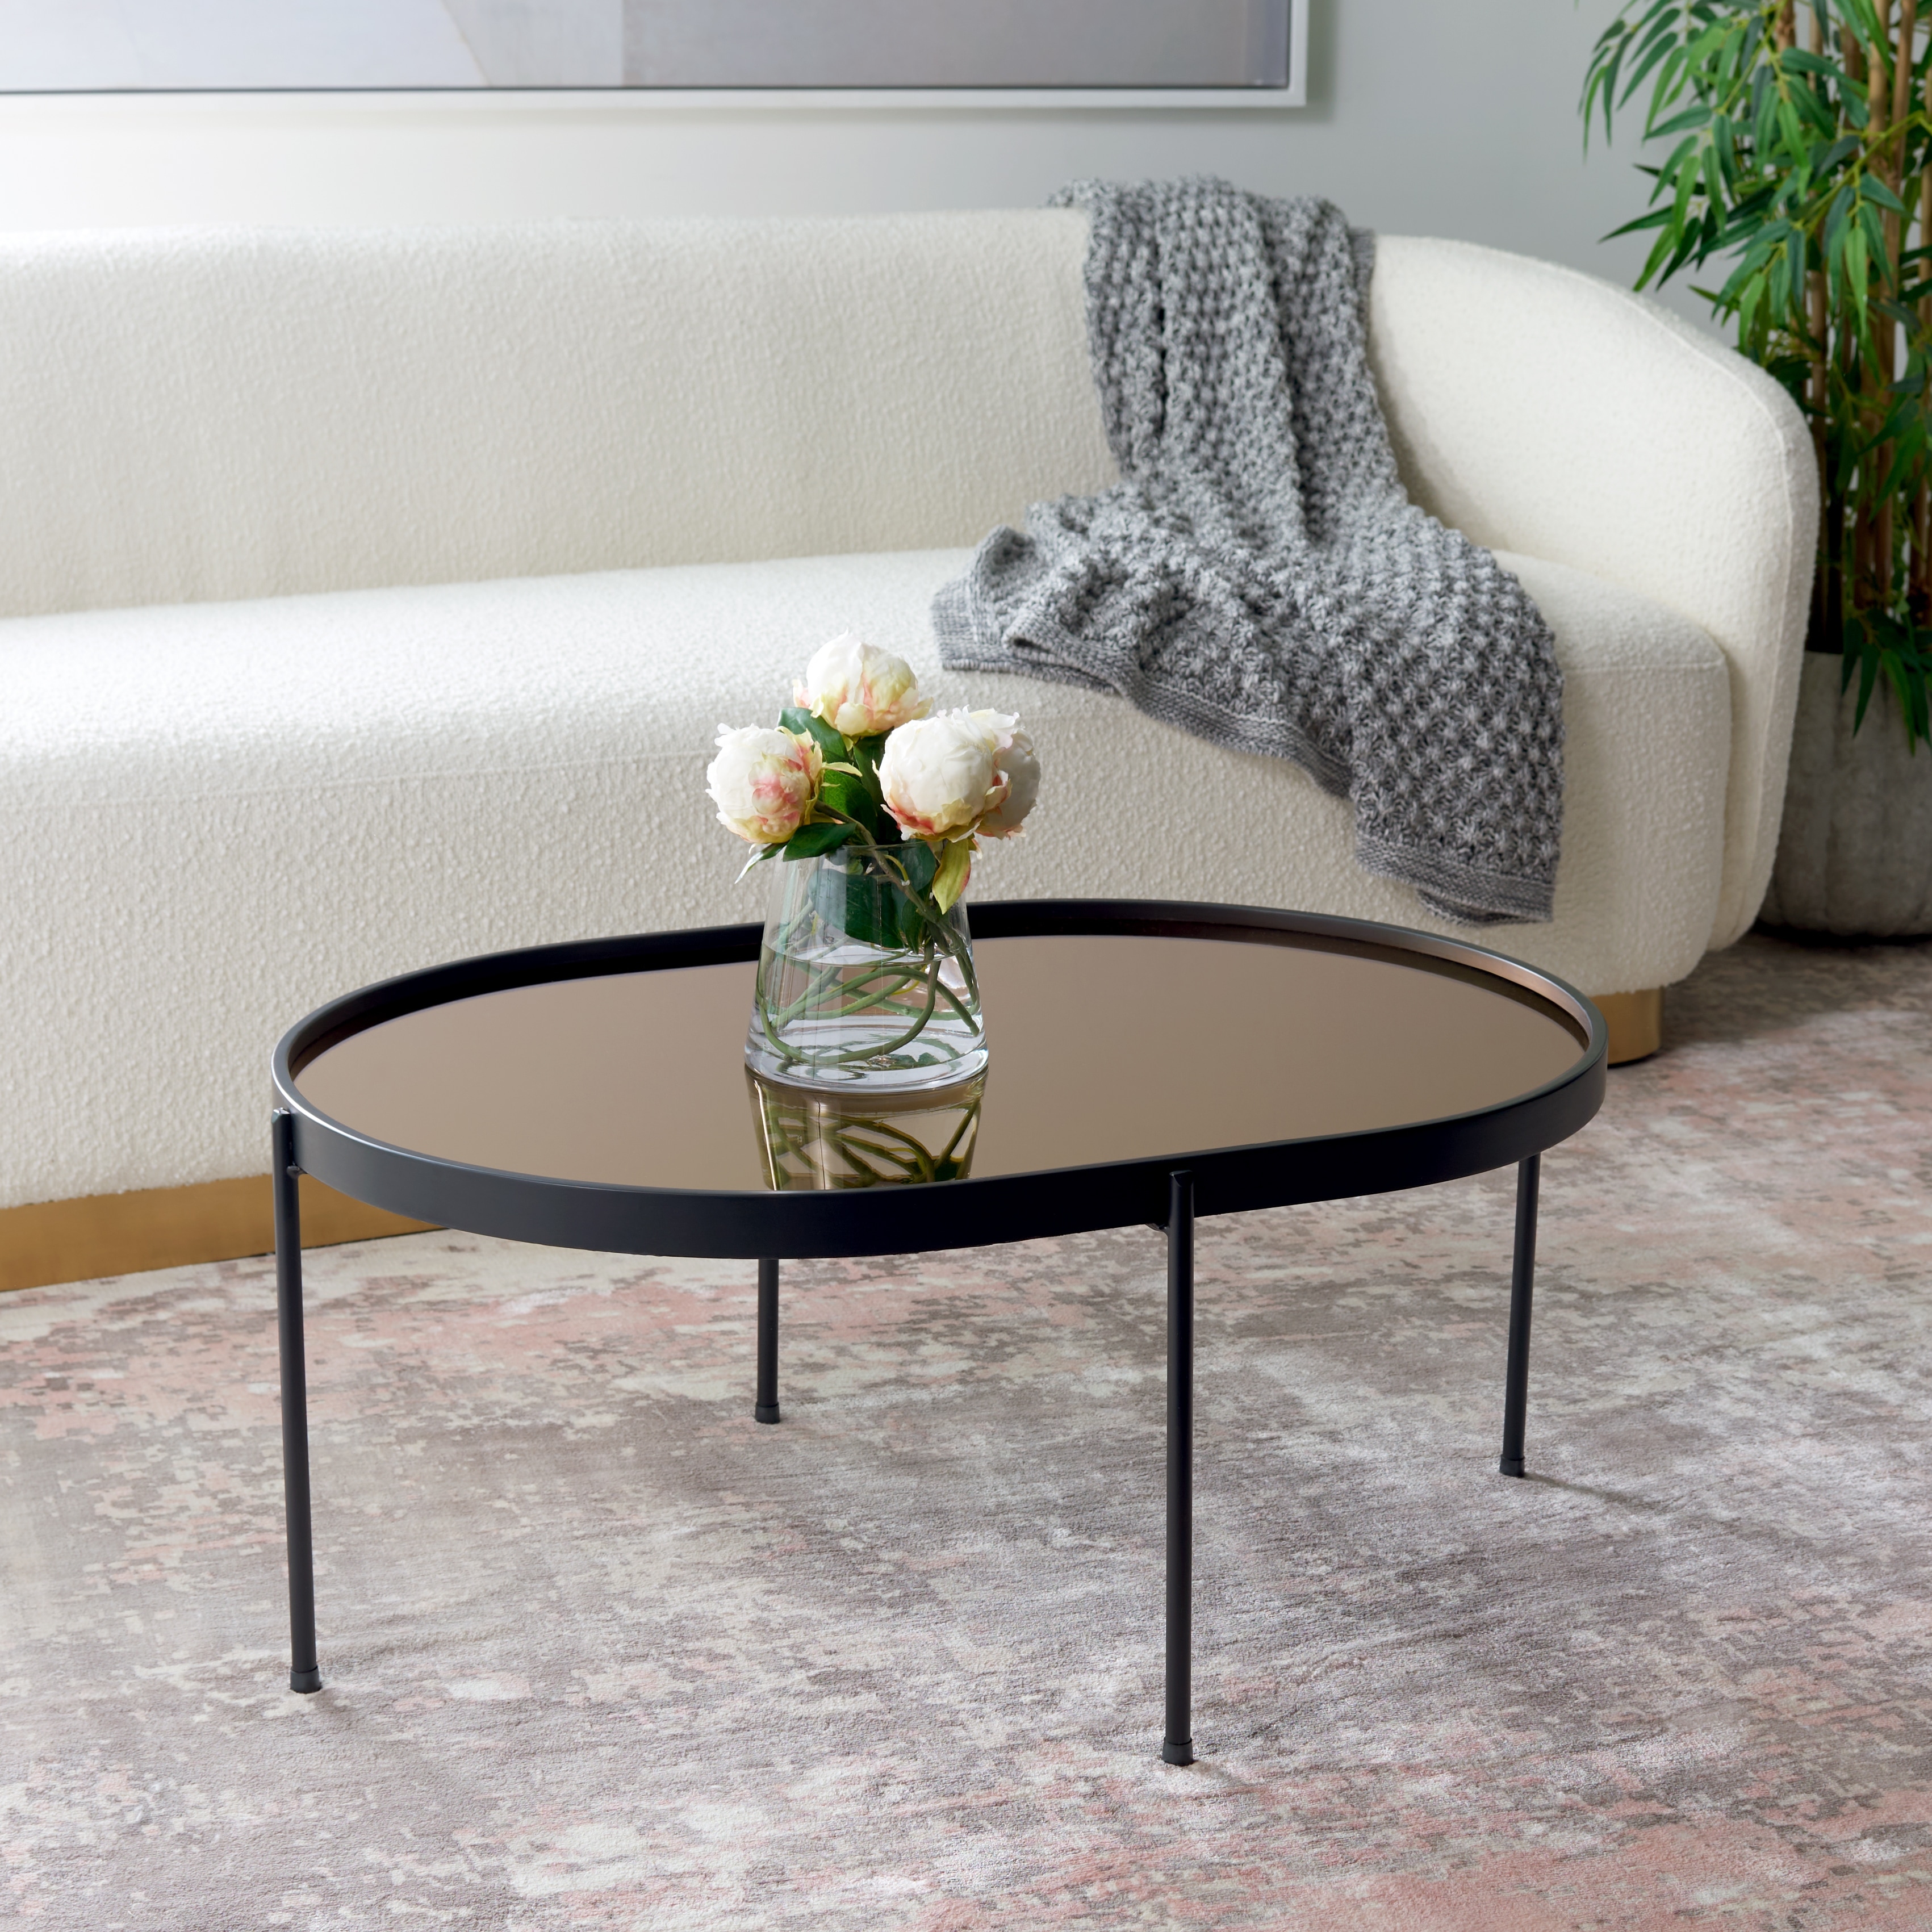 SAFAVIEH Emmerich Mirrored Oval Coffee Table 32 in. W x 23 in. D x 14 in.  H Bed Bath  Beyond 36978220